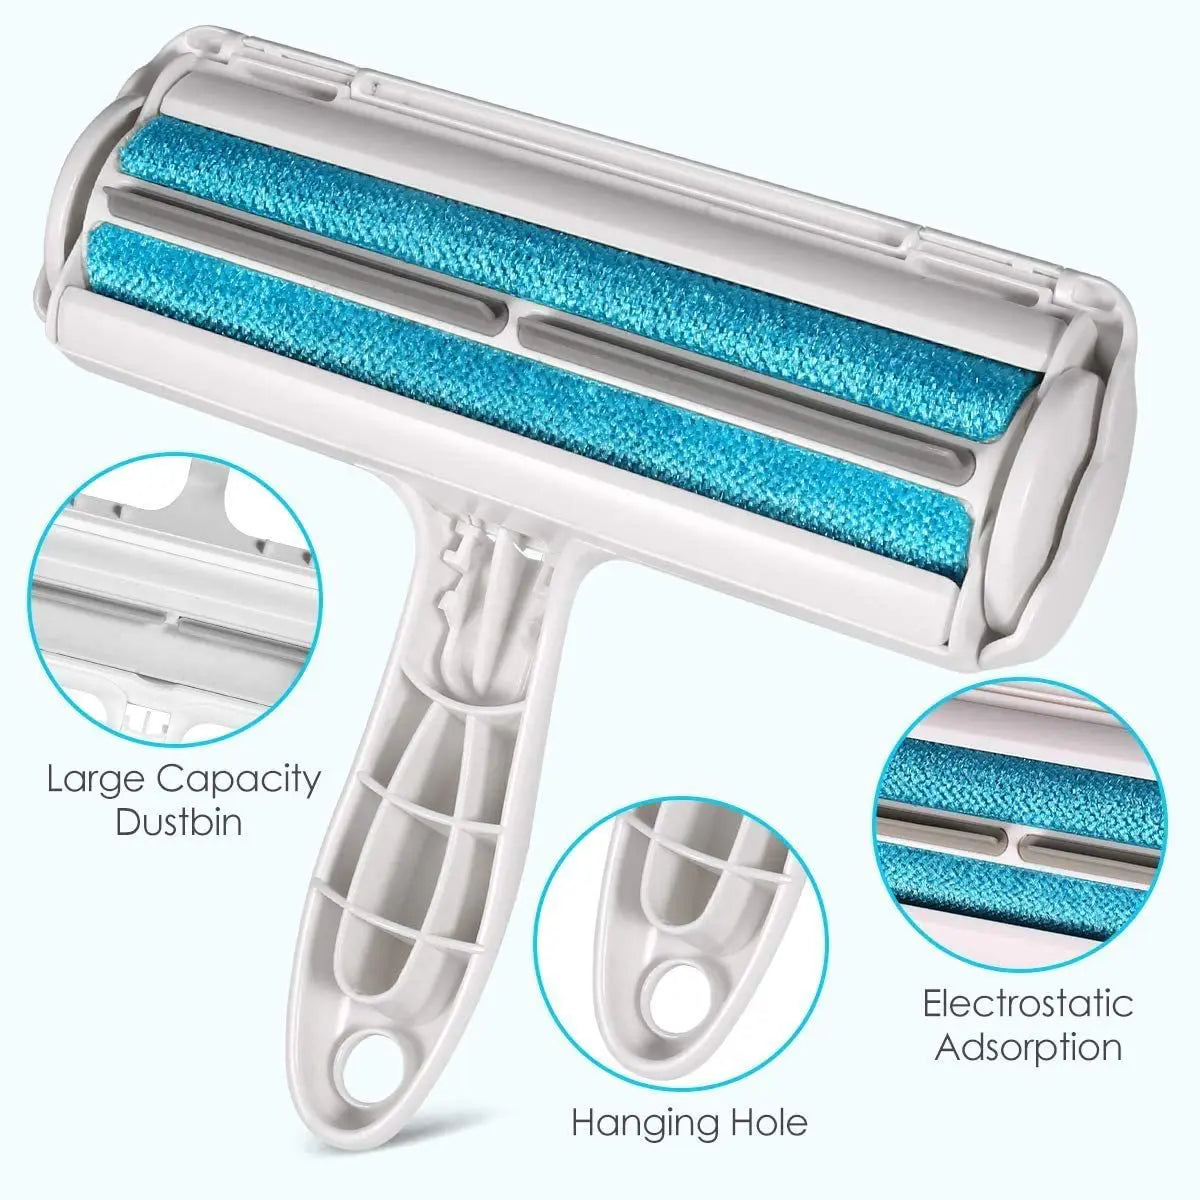 Pet Hair Roller: Self-Cleaning Fur Remover for Dogs & Cats - Efficient Tool  ourlum.com   